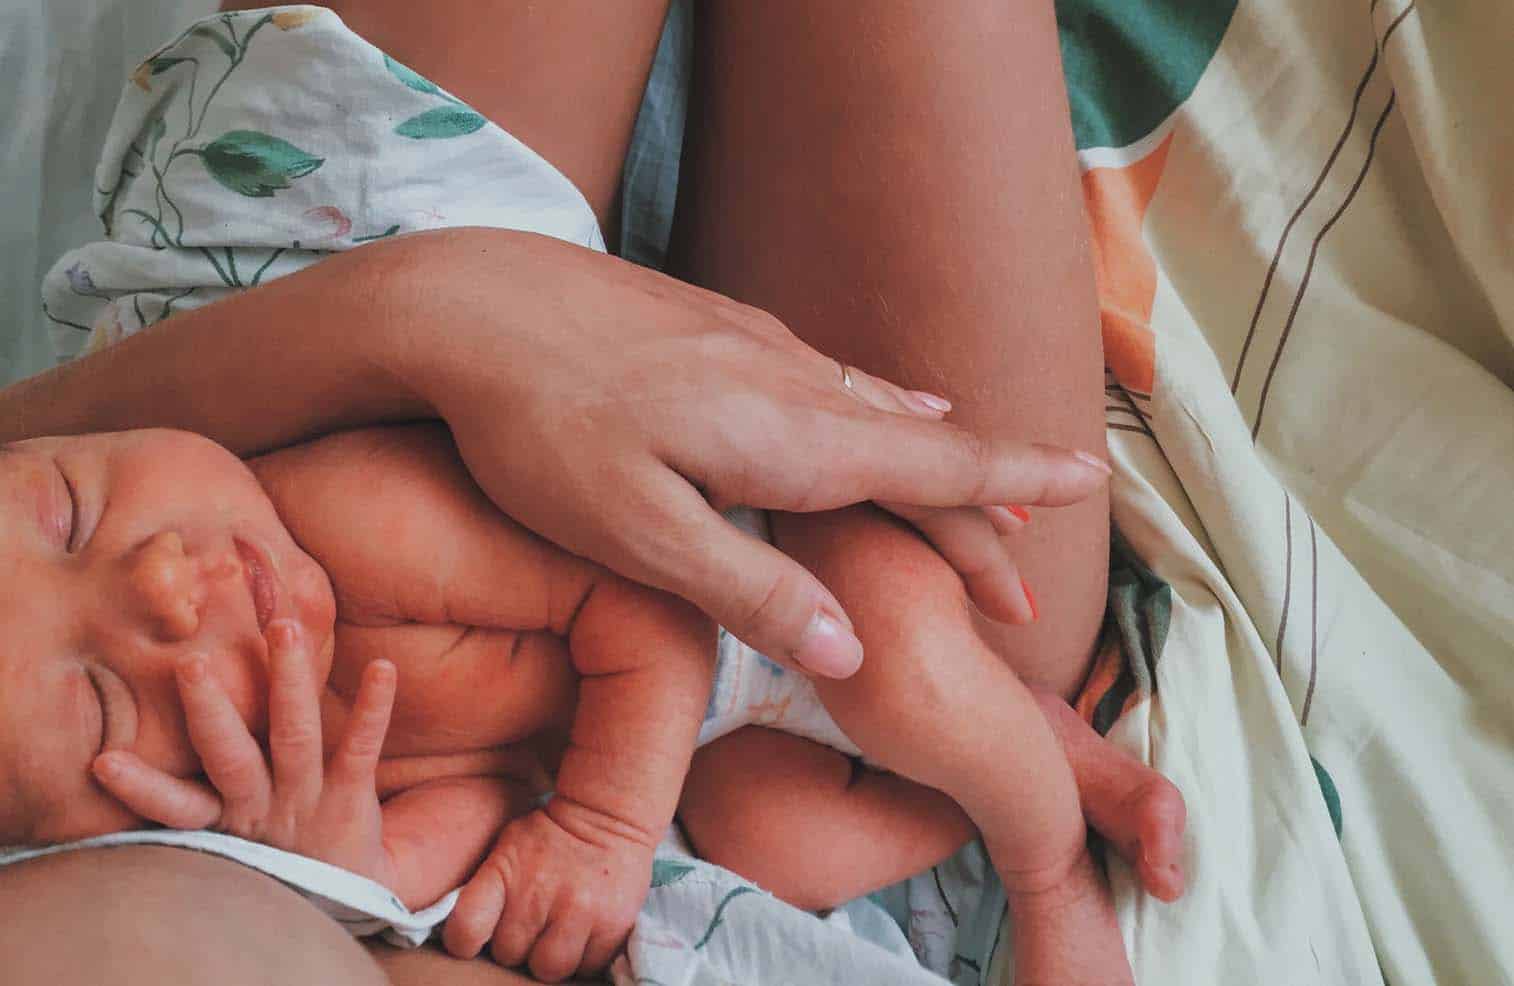 From the moment your baby is born you'll have visitors waiting to see you. Here's a few tips to help you deal with visitors after birth in the nicest way possible, while still looking after yourself and your babe.